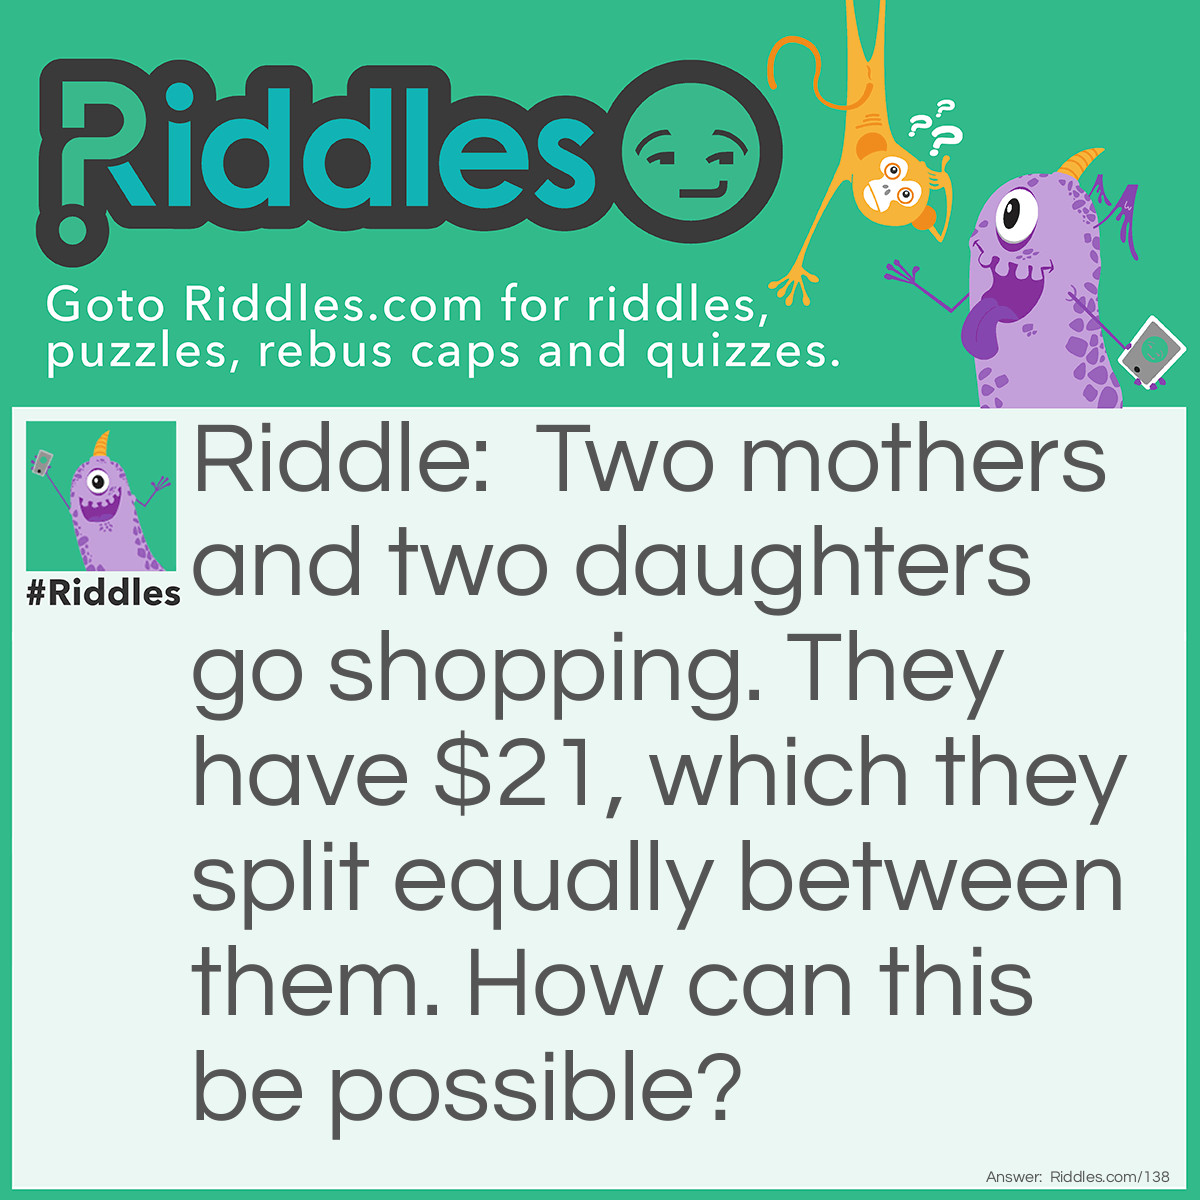 Riddle: Two mothers and two daughters go shopping. They have $21, which they split equally between them. How can this be possible? Answer: There are only three people. One of the mothers is a daughter also, because there is a grandmother, a mother and a daughter! They each get $7 exactly.